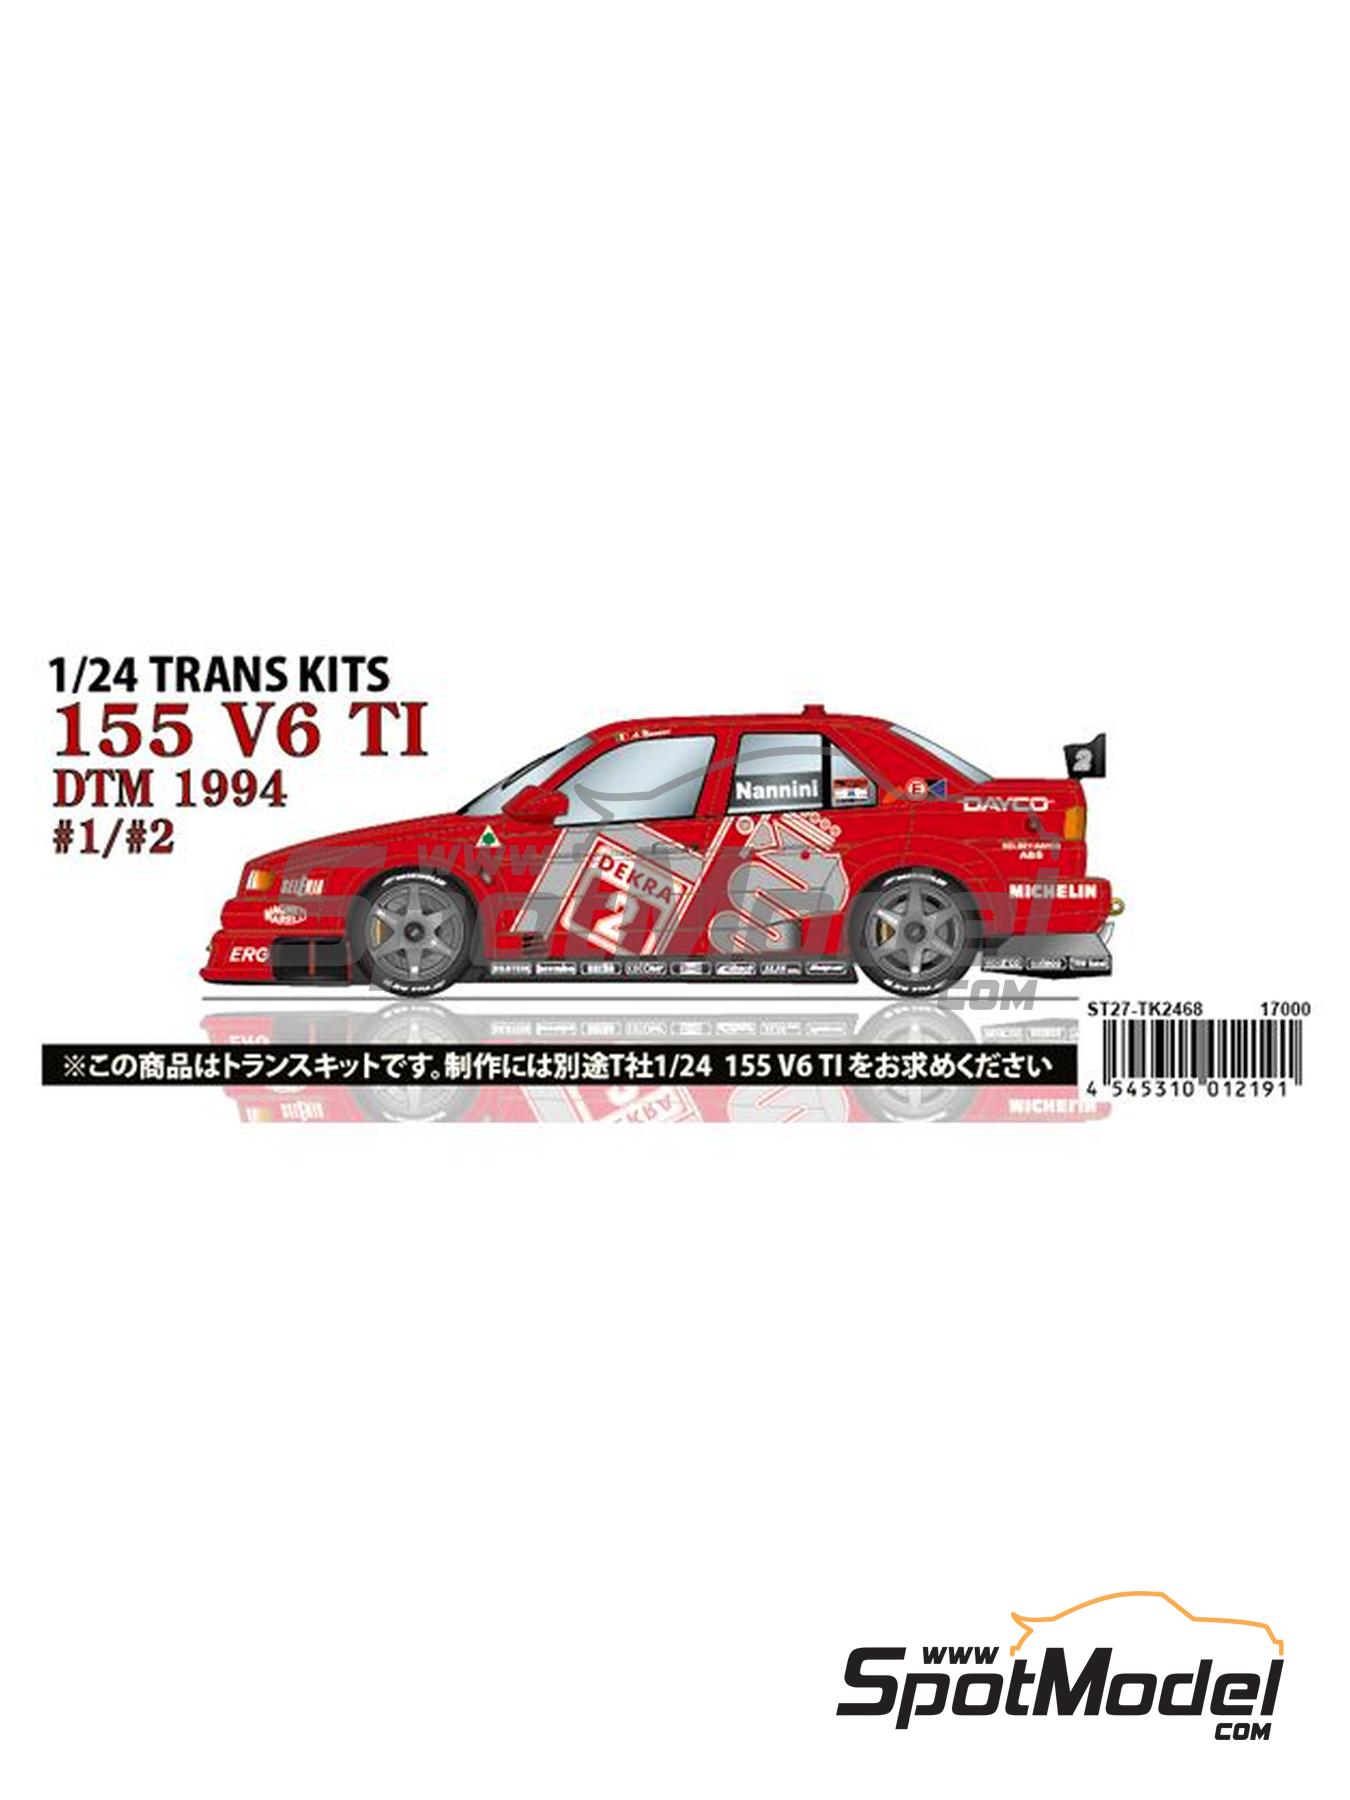 Alfa Romeo 155 V6 TI Alfa Corse Team - DTM 1994. Marking / livery in 1/24  scale manufactured by Studio27 (ref. ST27-TK2468, also 4545310012191 and TK2